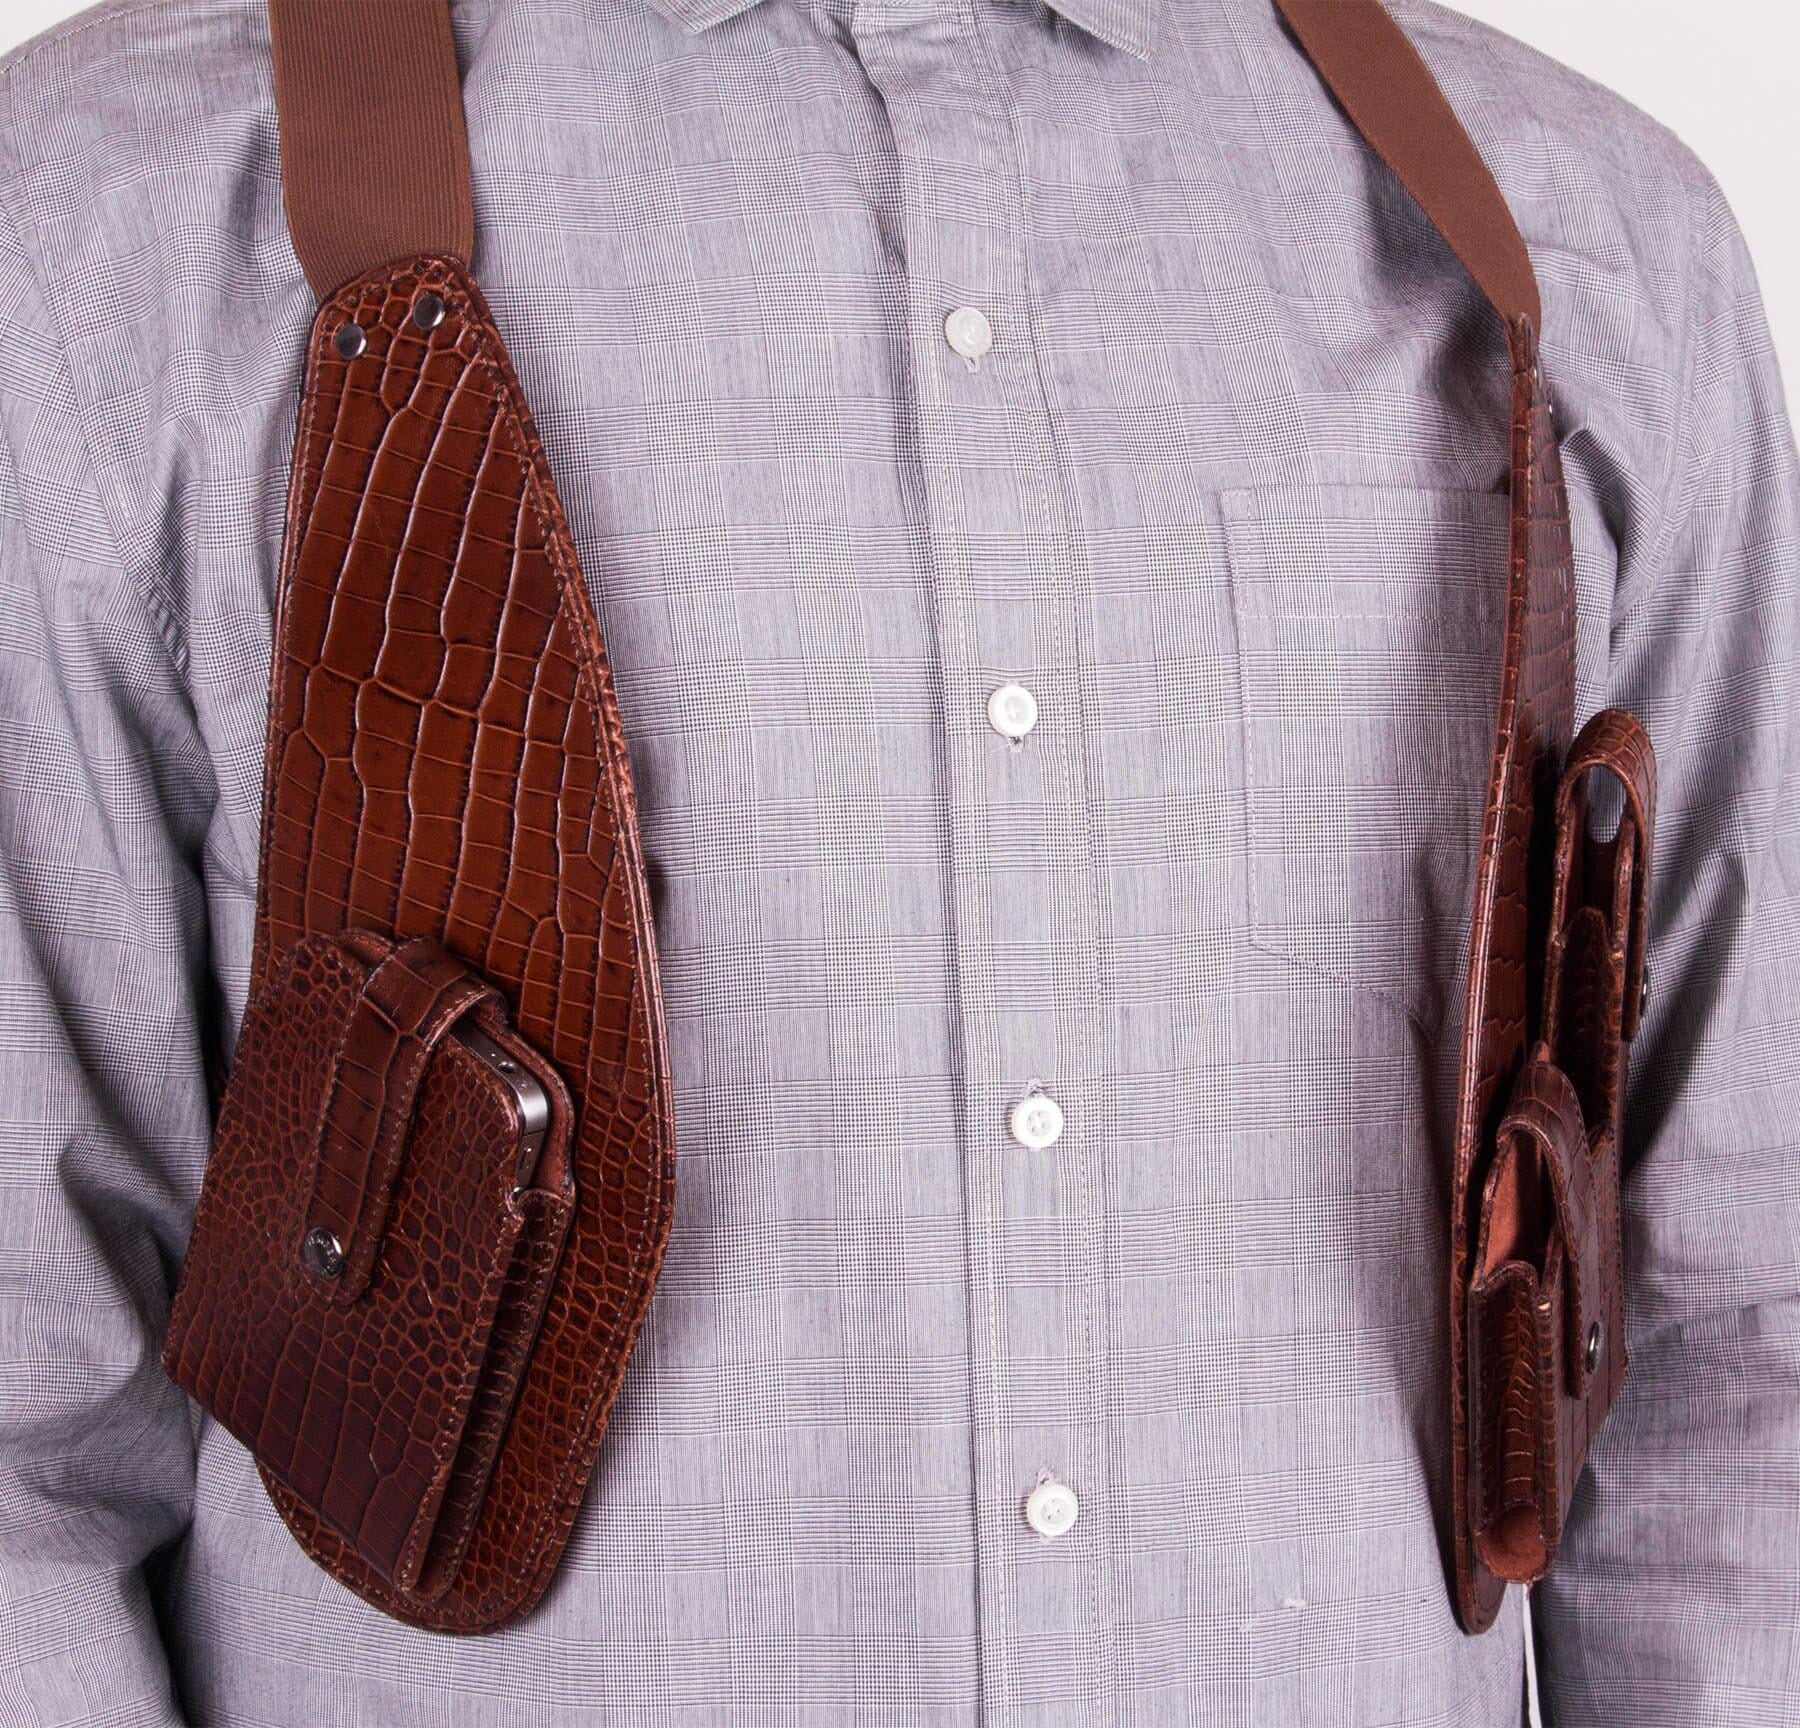 Men's Cellphone Leather Holster - Members Only Official